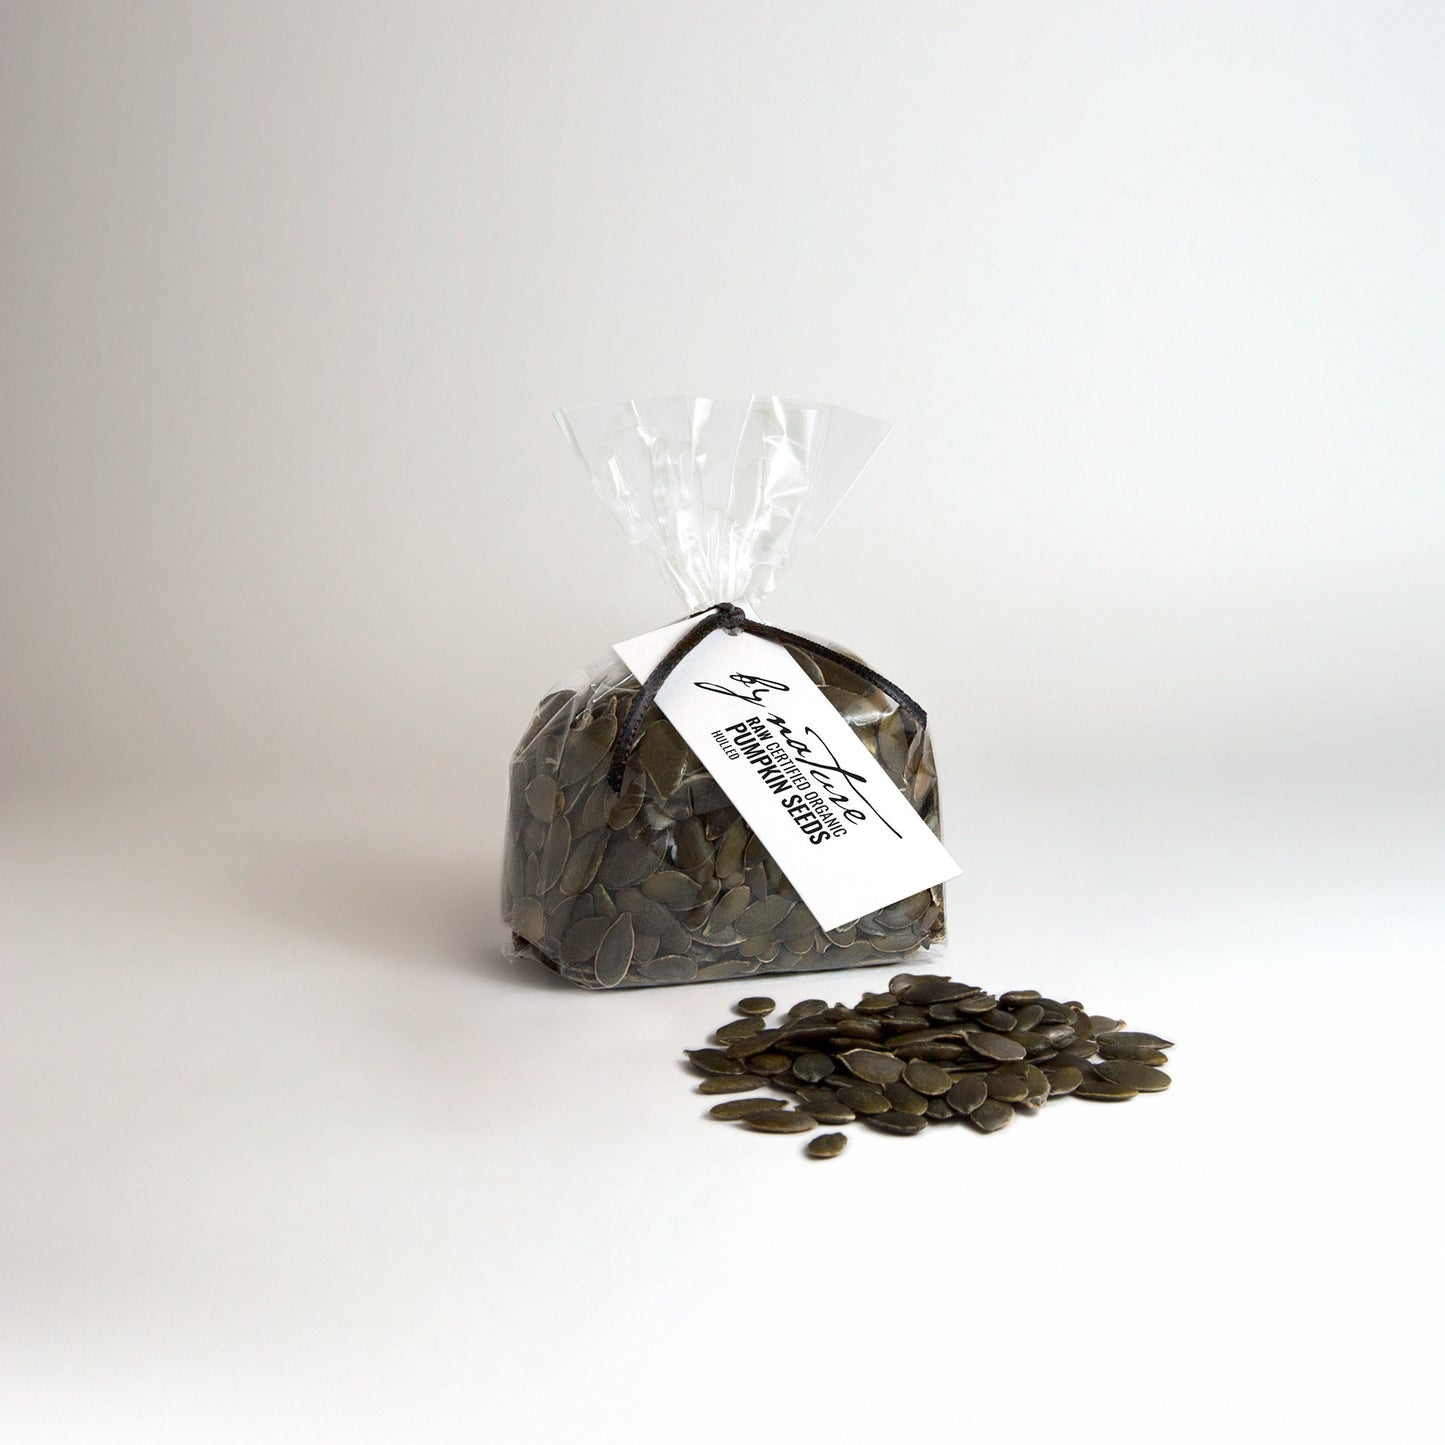 BY NATURE Pumpkin Seeds, 100g - hulled, raw, certified organic at source.